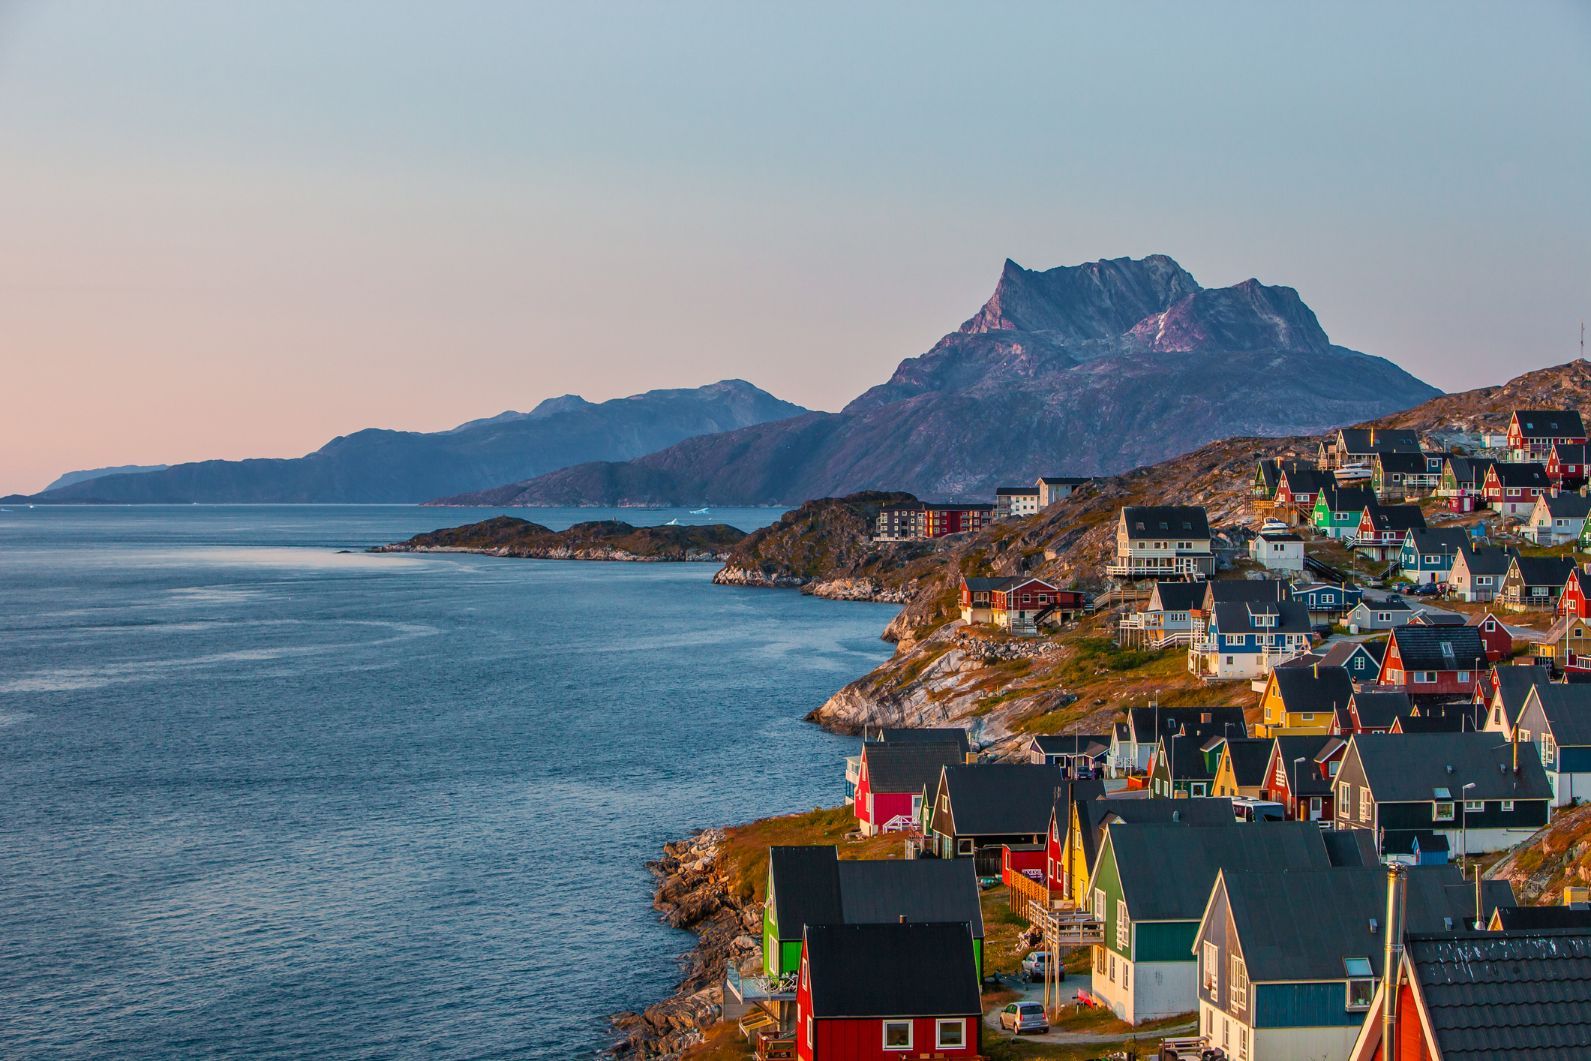 Colourful houses on the hillsides of Nuuk, the capital of Greenland